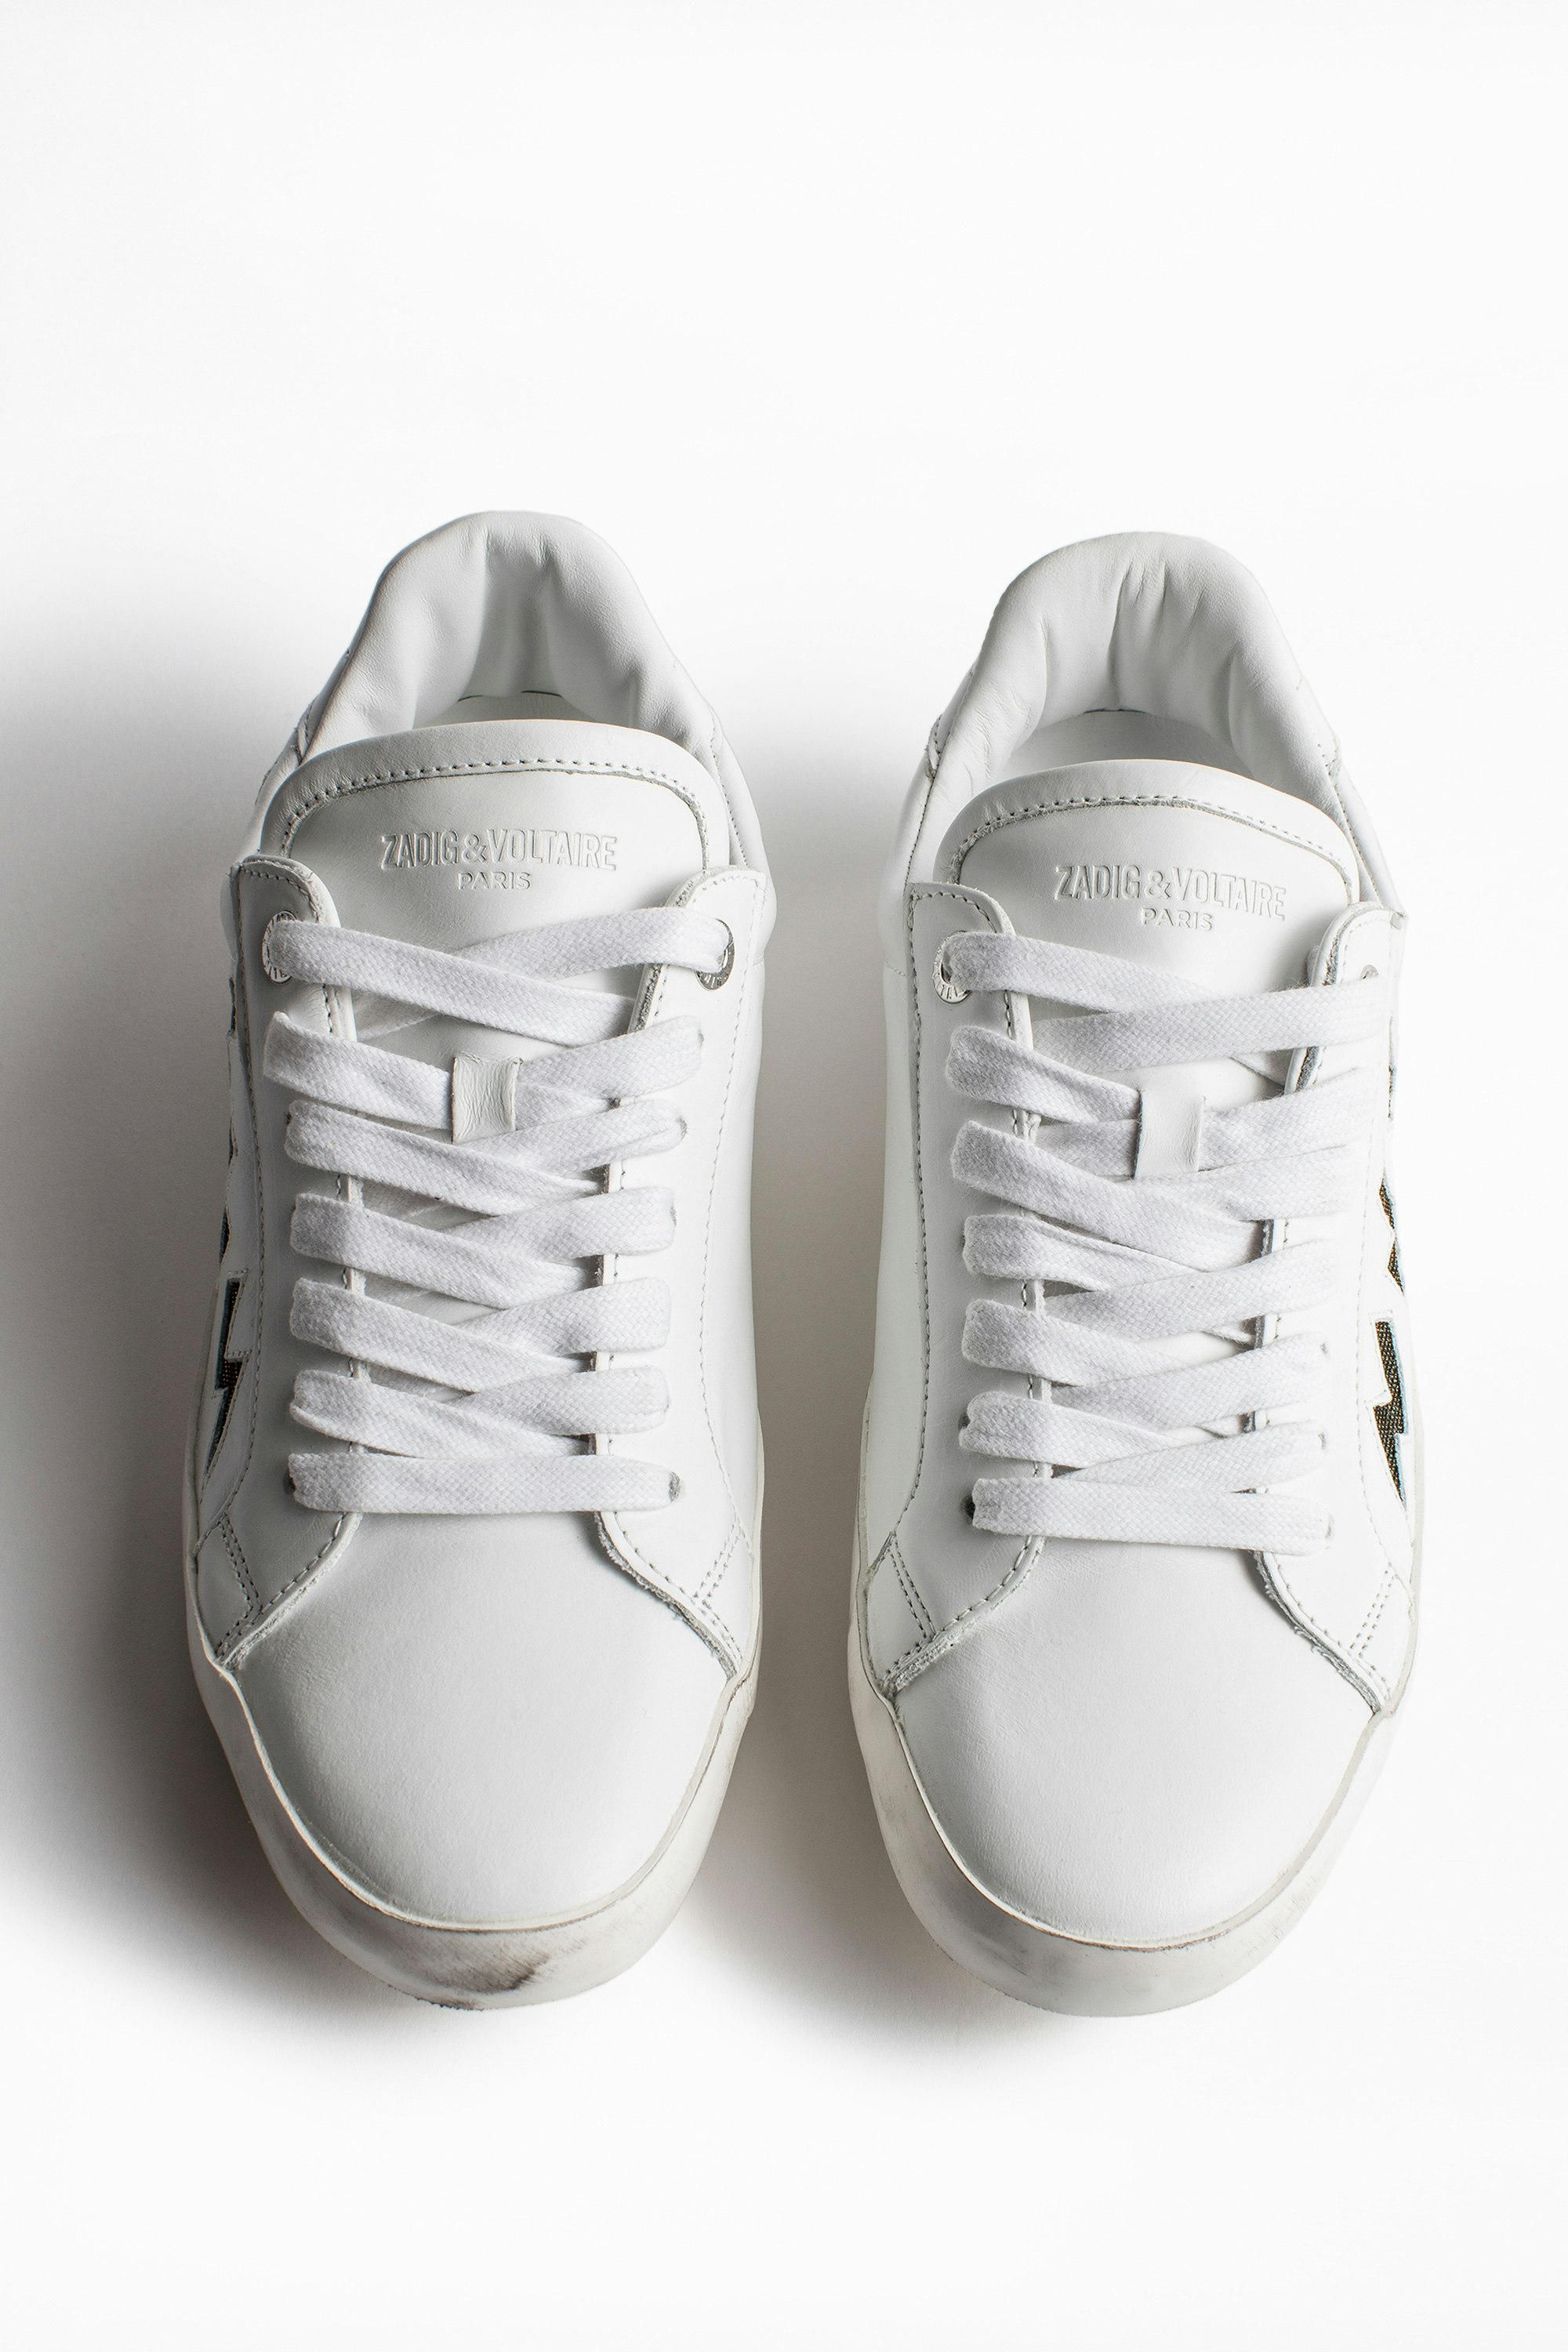 zadig & voltaire white sneakers